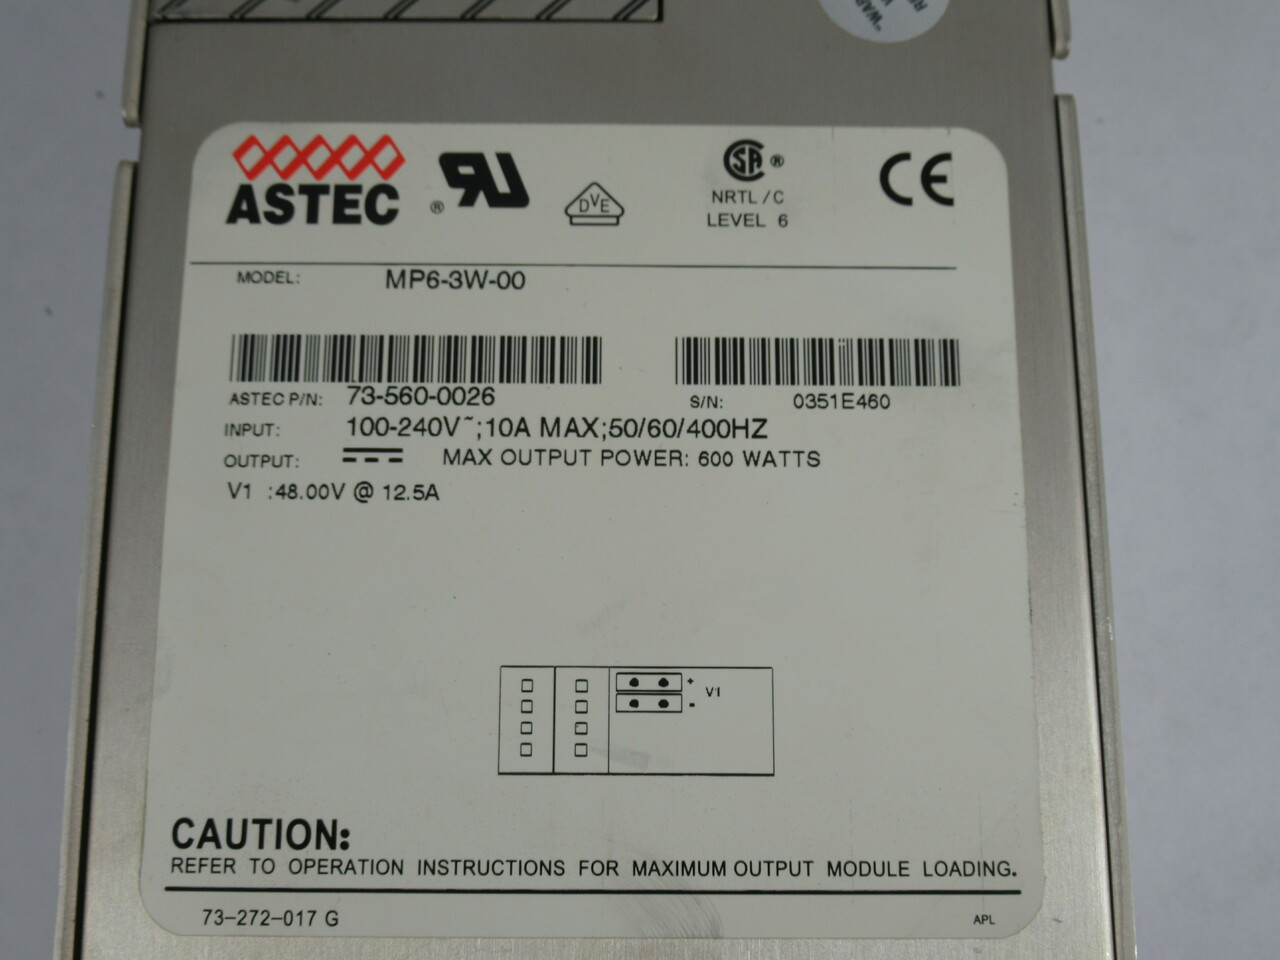 Astec MP6-3W-00 Power Supply In: 100-240V 10A 50/60/400Hz Out: 600W USED